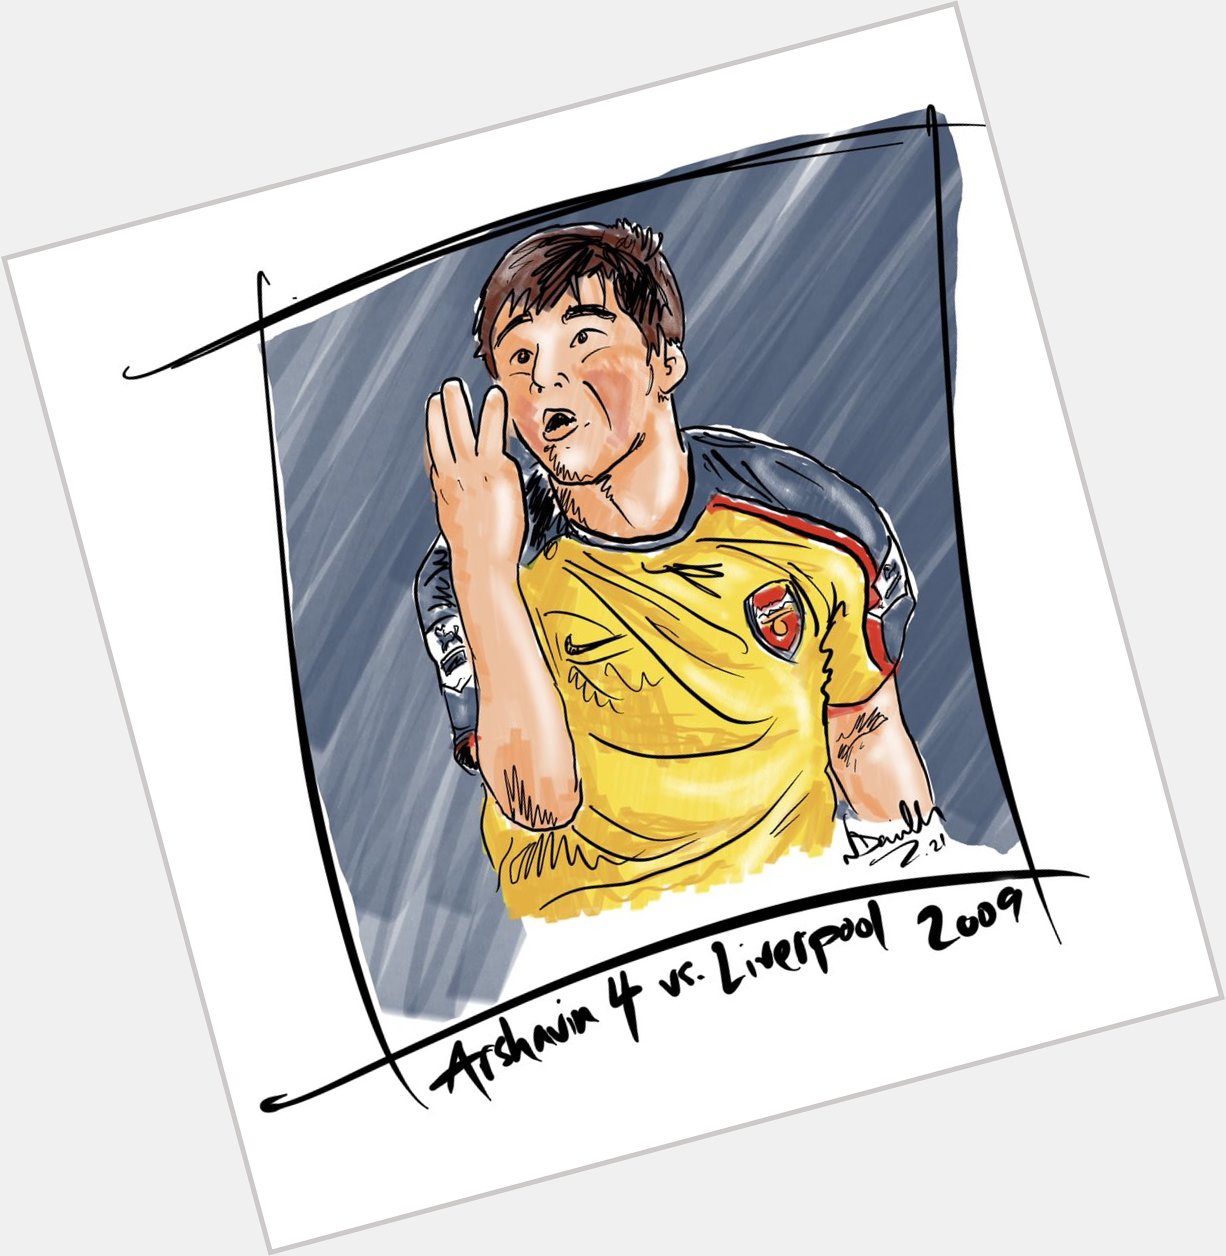 Happy Birthday Andrei Arshavin!! This was my first illustration.
Maybe it s time for an update?! 